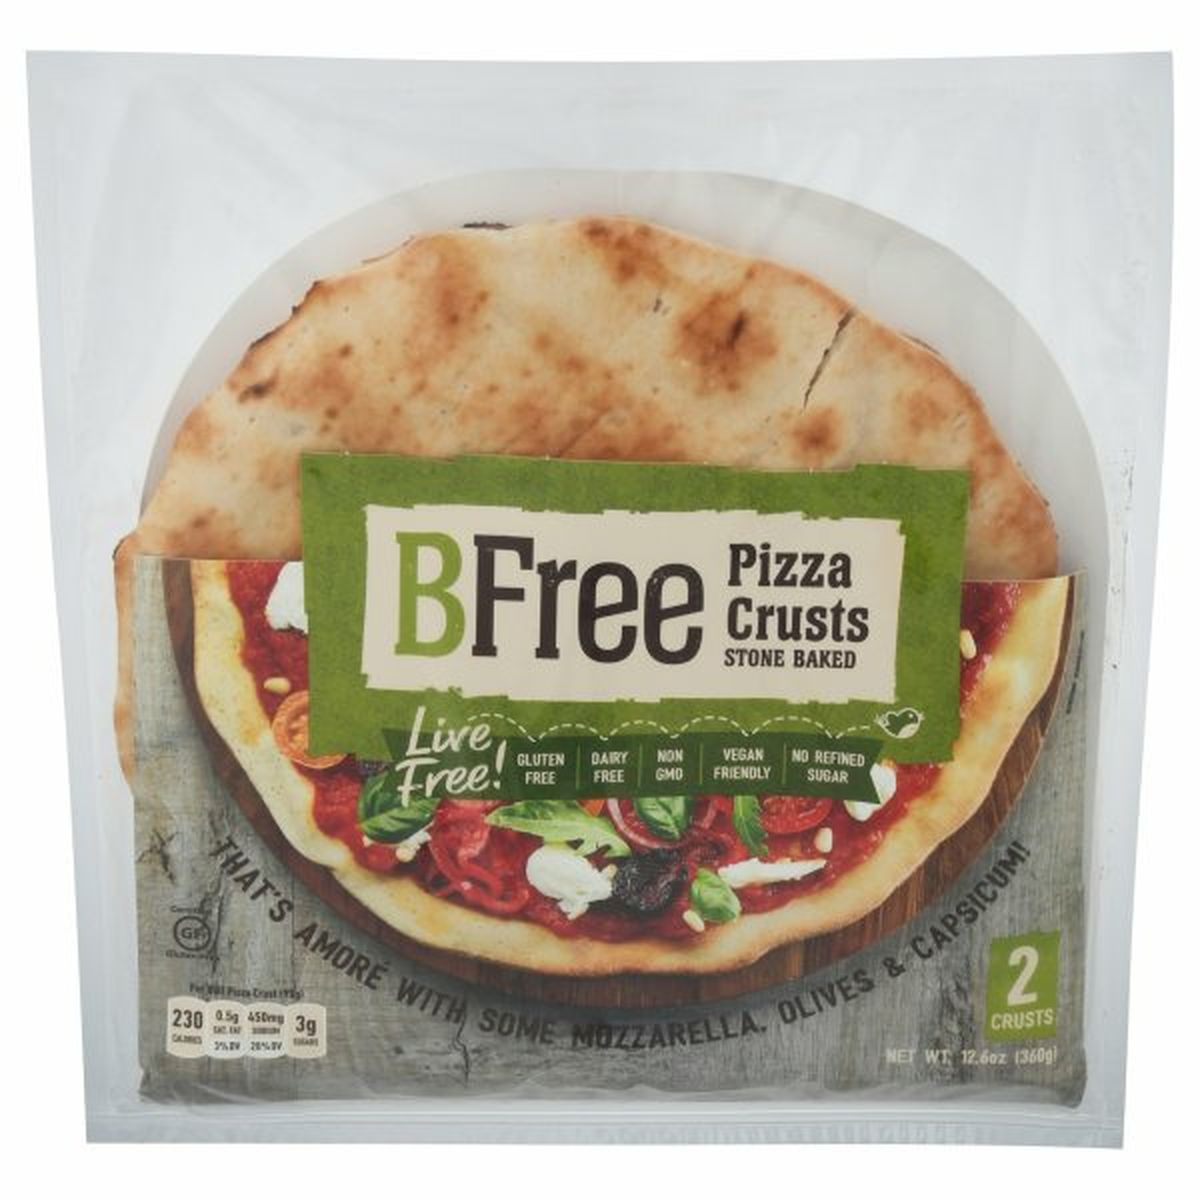 Calories in BFree Pizza Crusts, Stone Baked